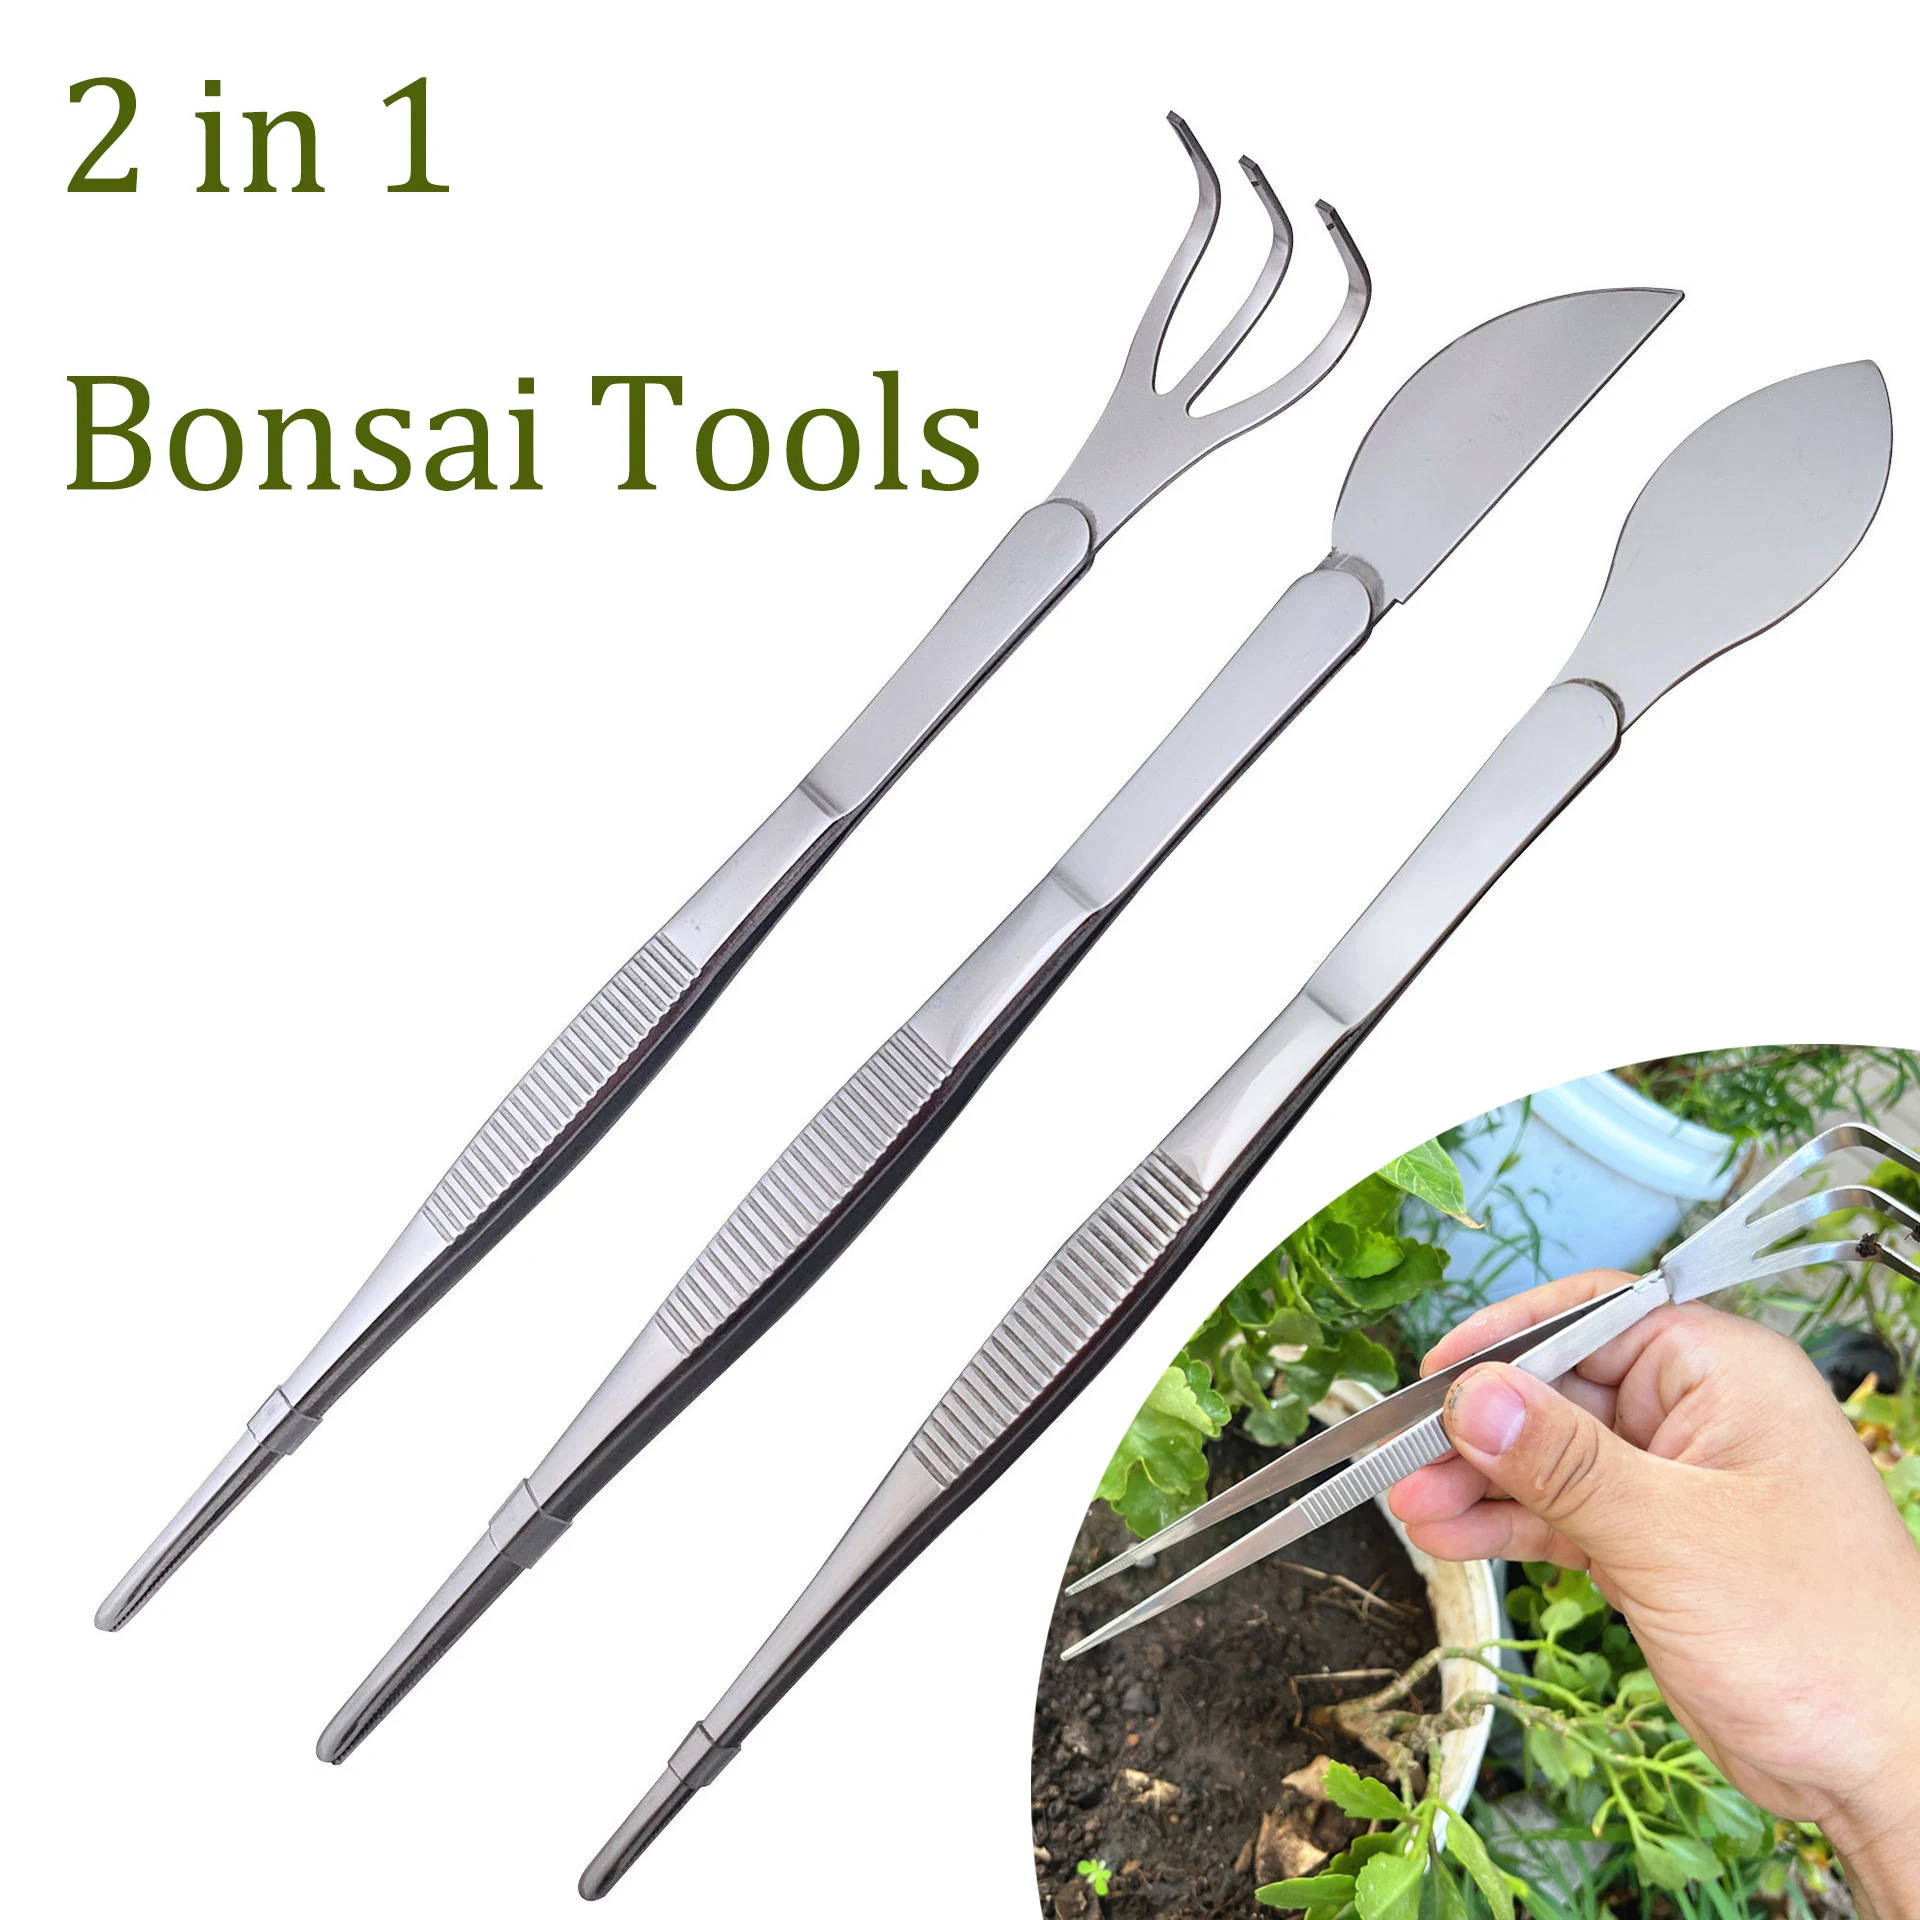 

For 2-in-1 Root With Stainless Tweezers Soil Rake Farming Ergonomical Succulents 304 Bonsai Crafting Steel Tool Handle With